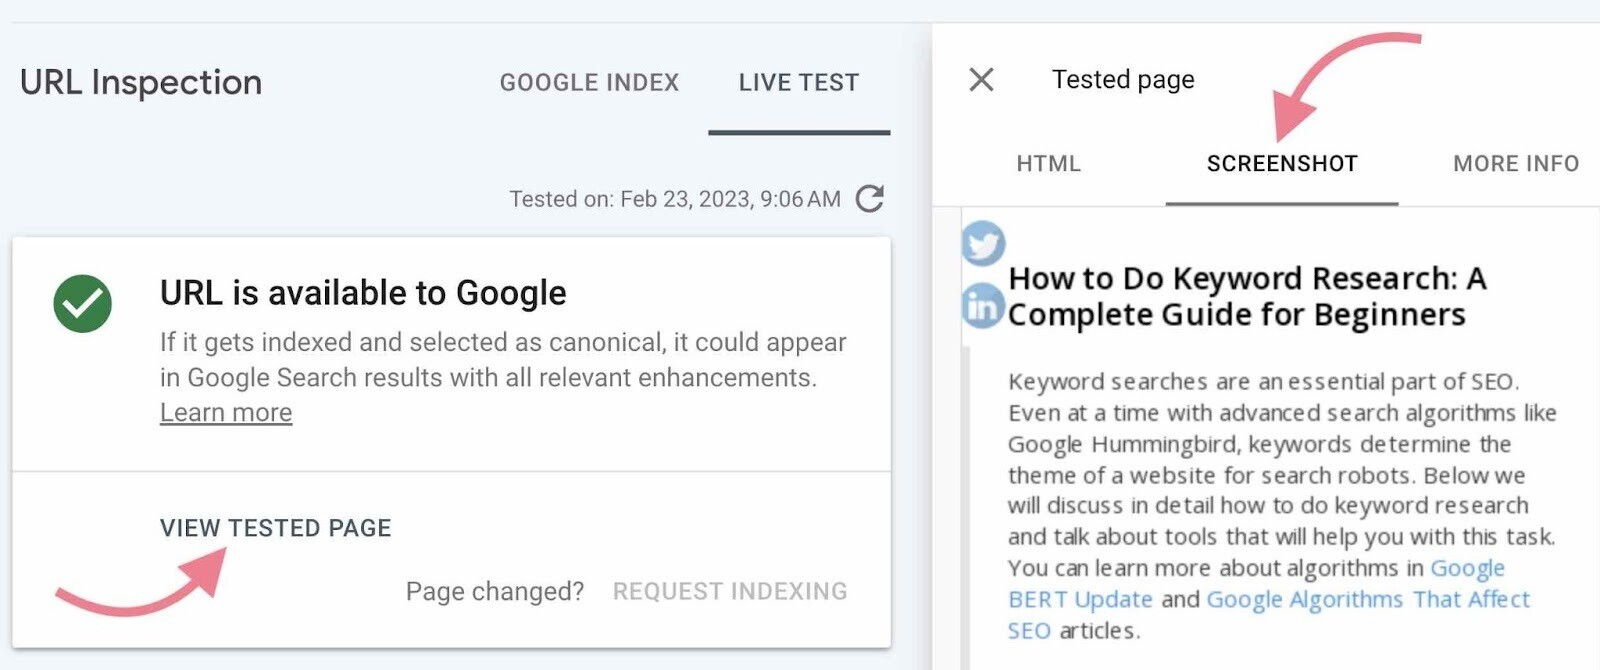 View Tested Page and Screenshot buttons